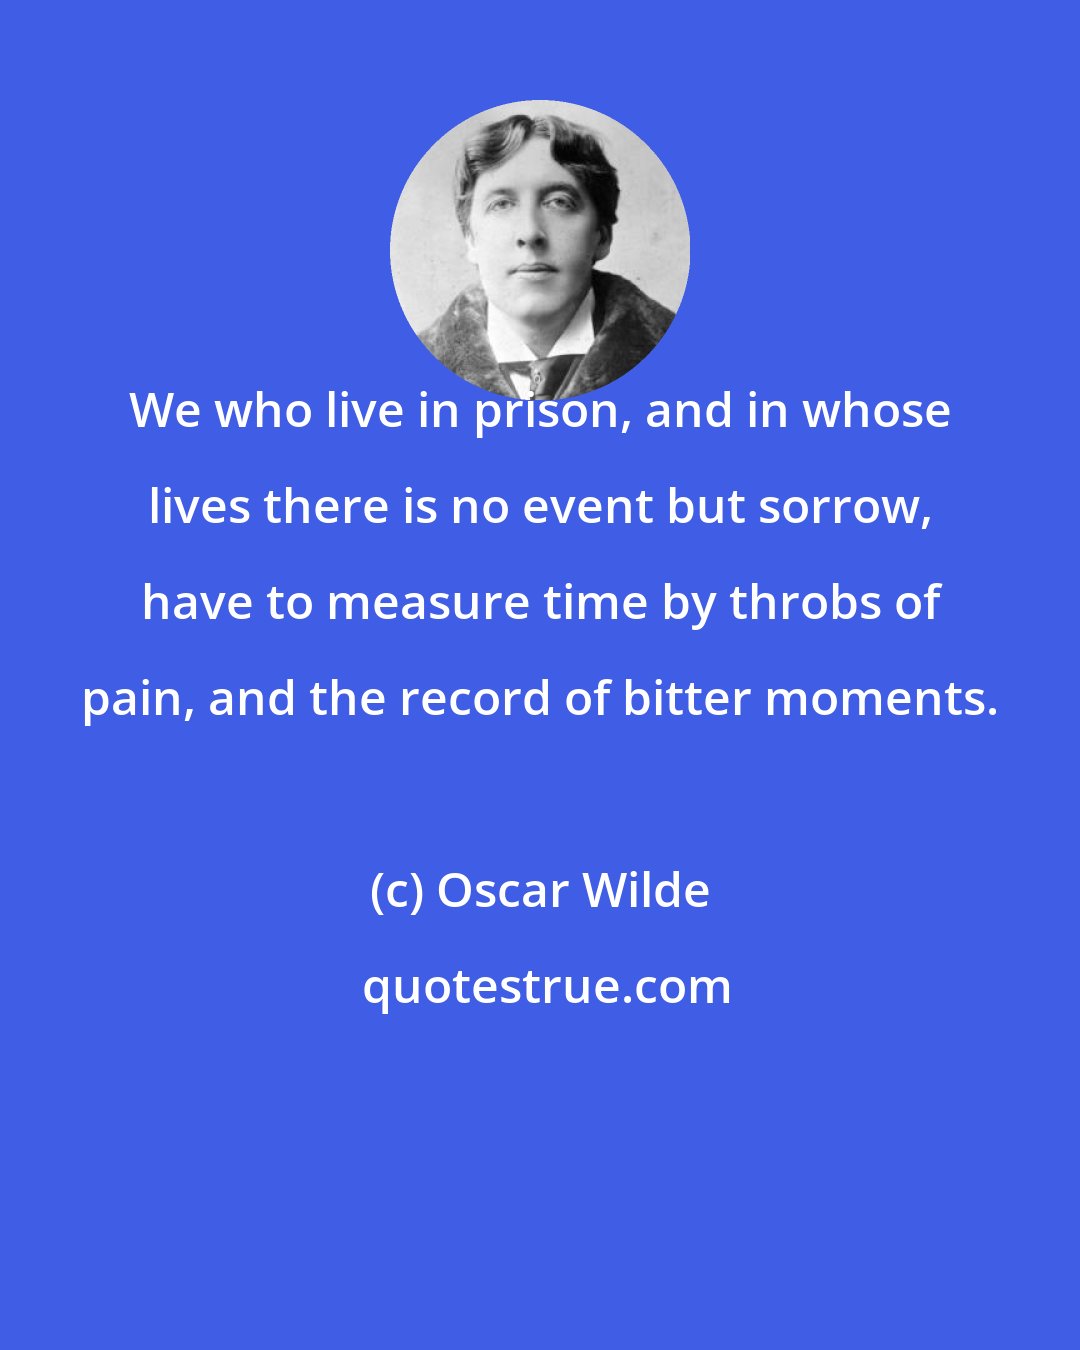 Oscar Wilde: We who live in prison, and in whose lives there is no event but sorrow, have to measure time by throbs of pain, and the record of bitter moments.